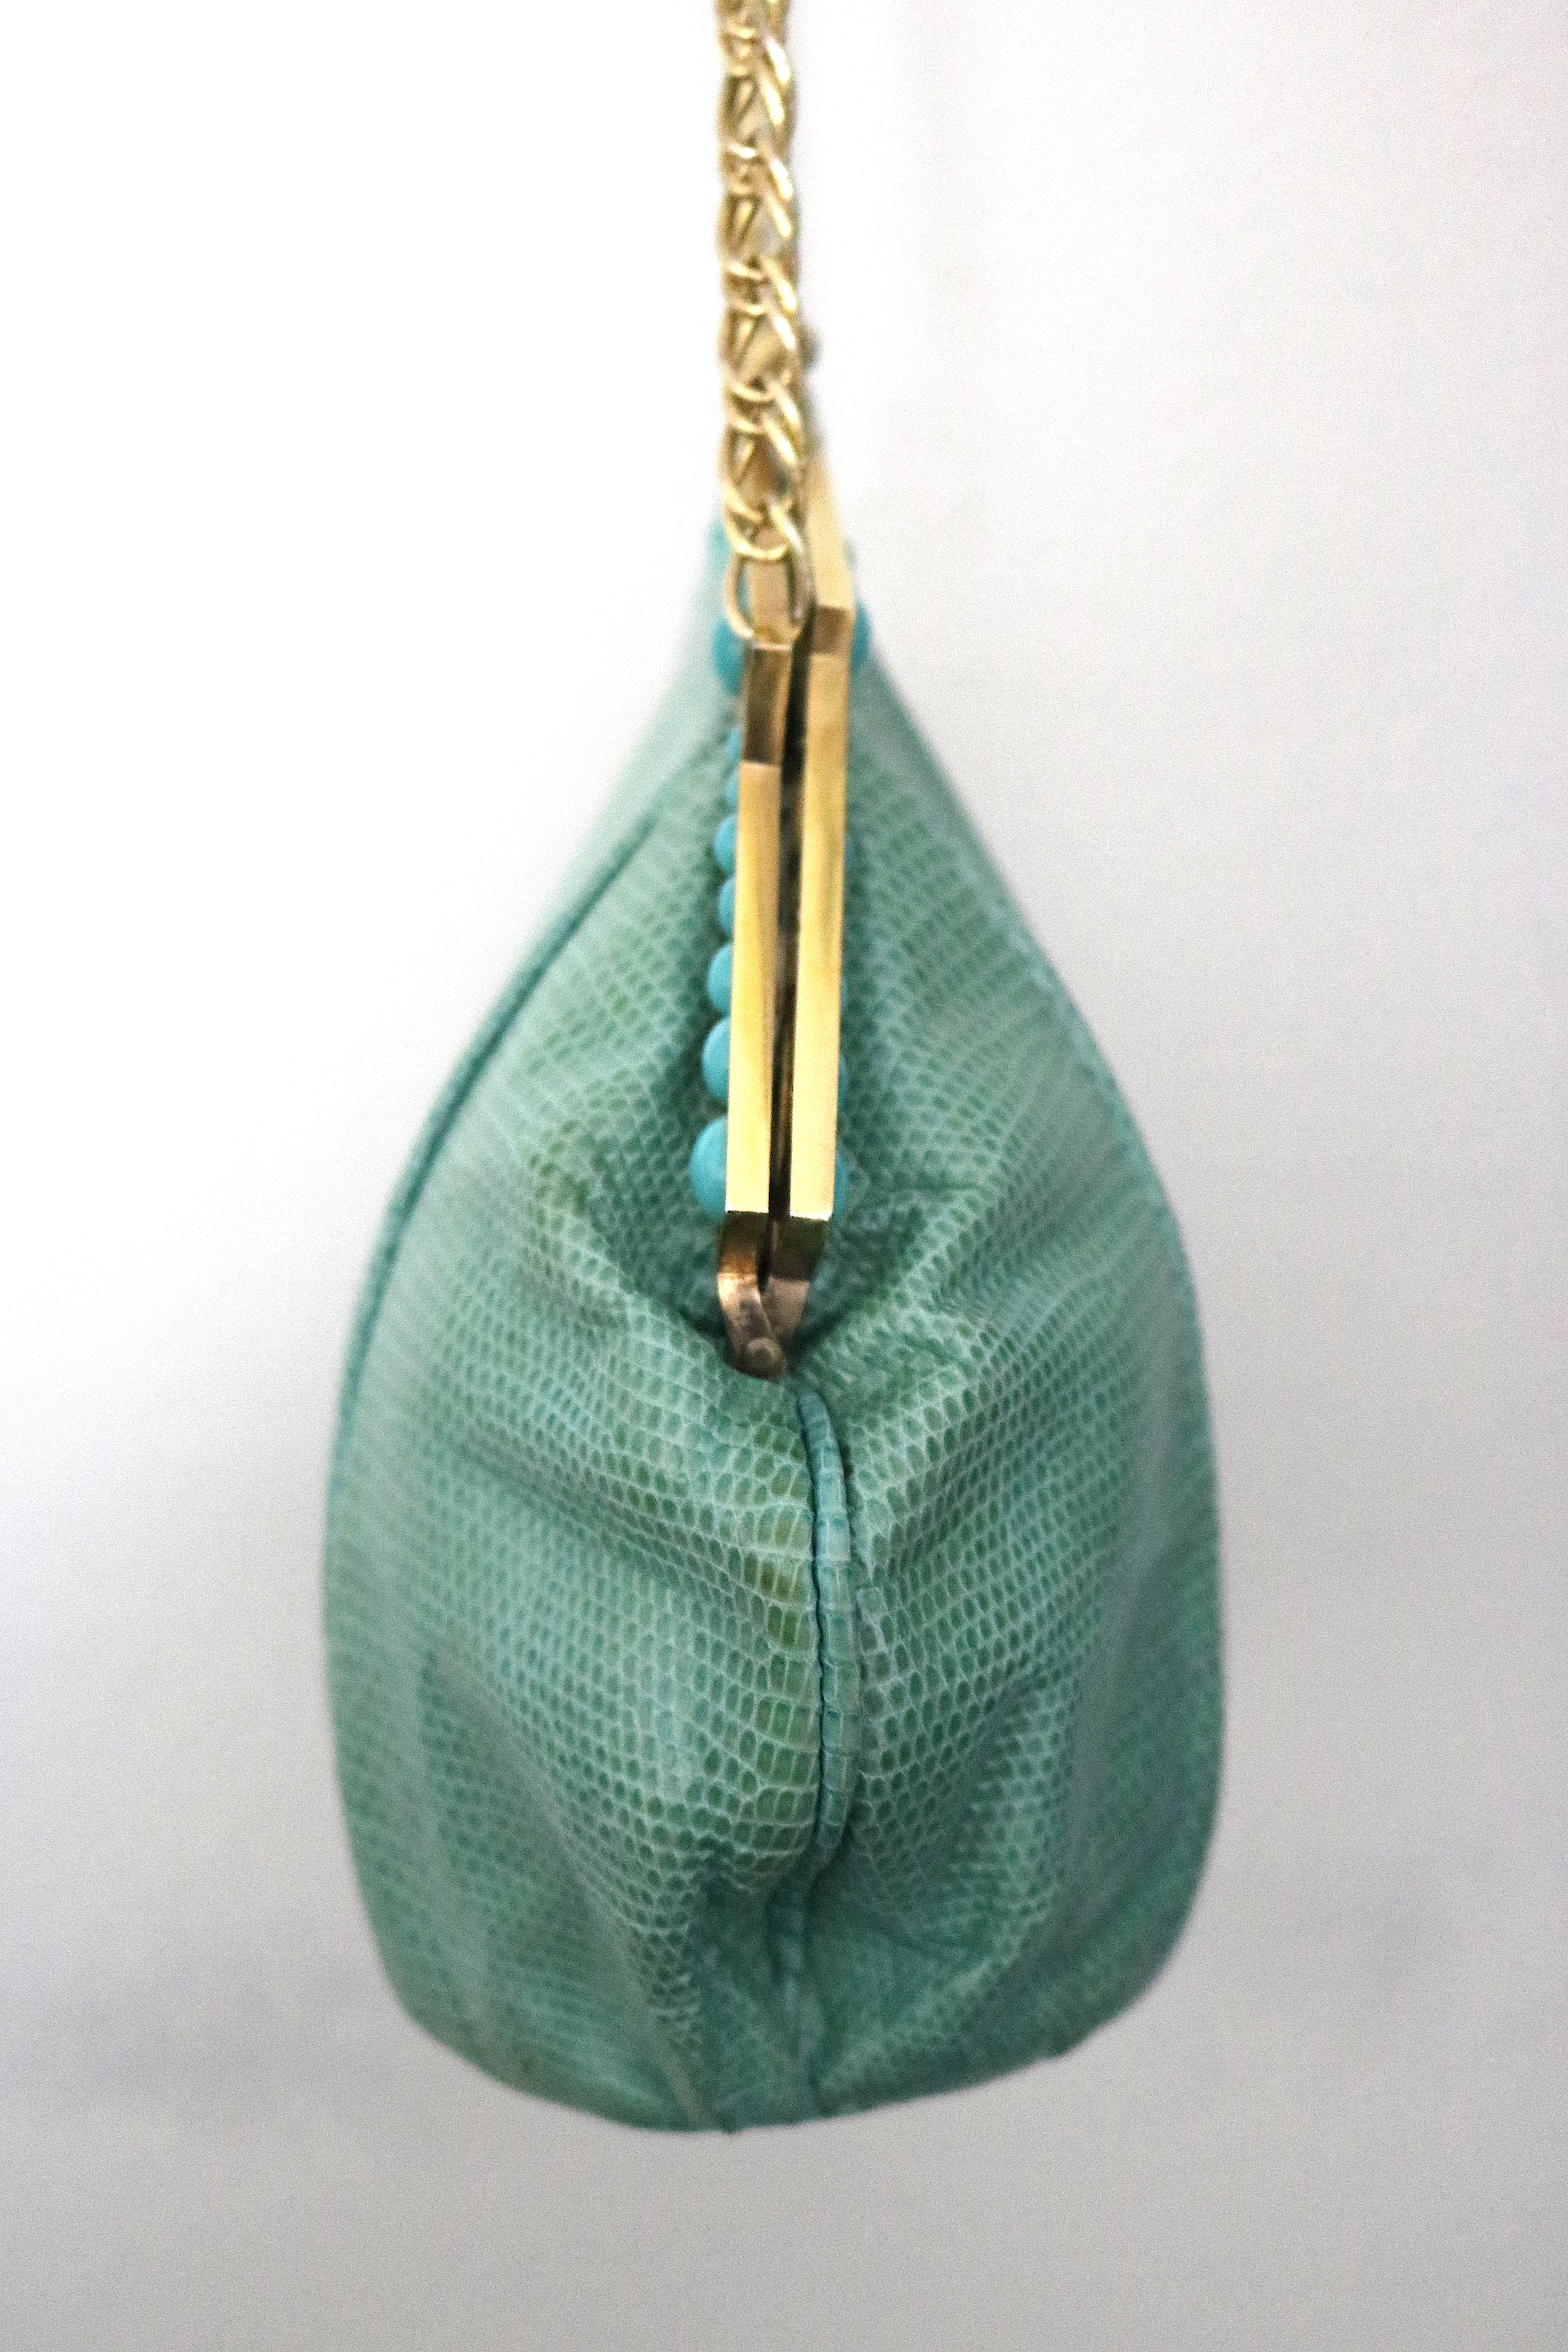 Art Deco Gold Plate c 1930 Frame Snakeskin Evening Bag Turquoise Beads In Good Condition For Sale In West Palm Beach, FL